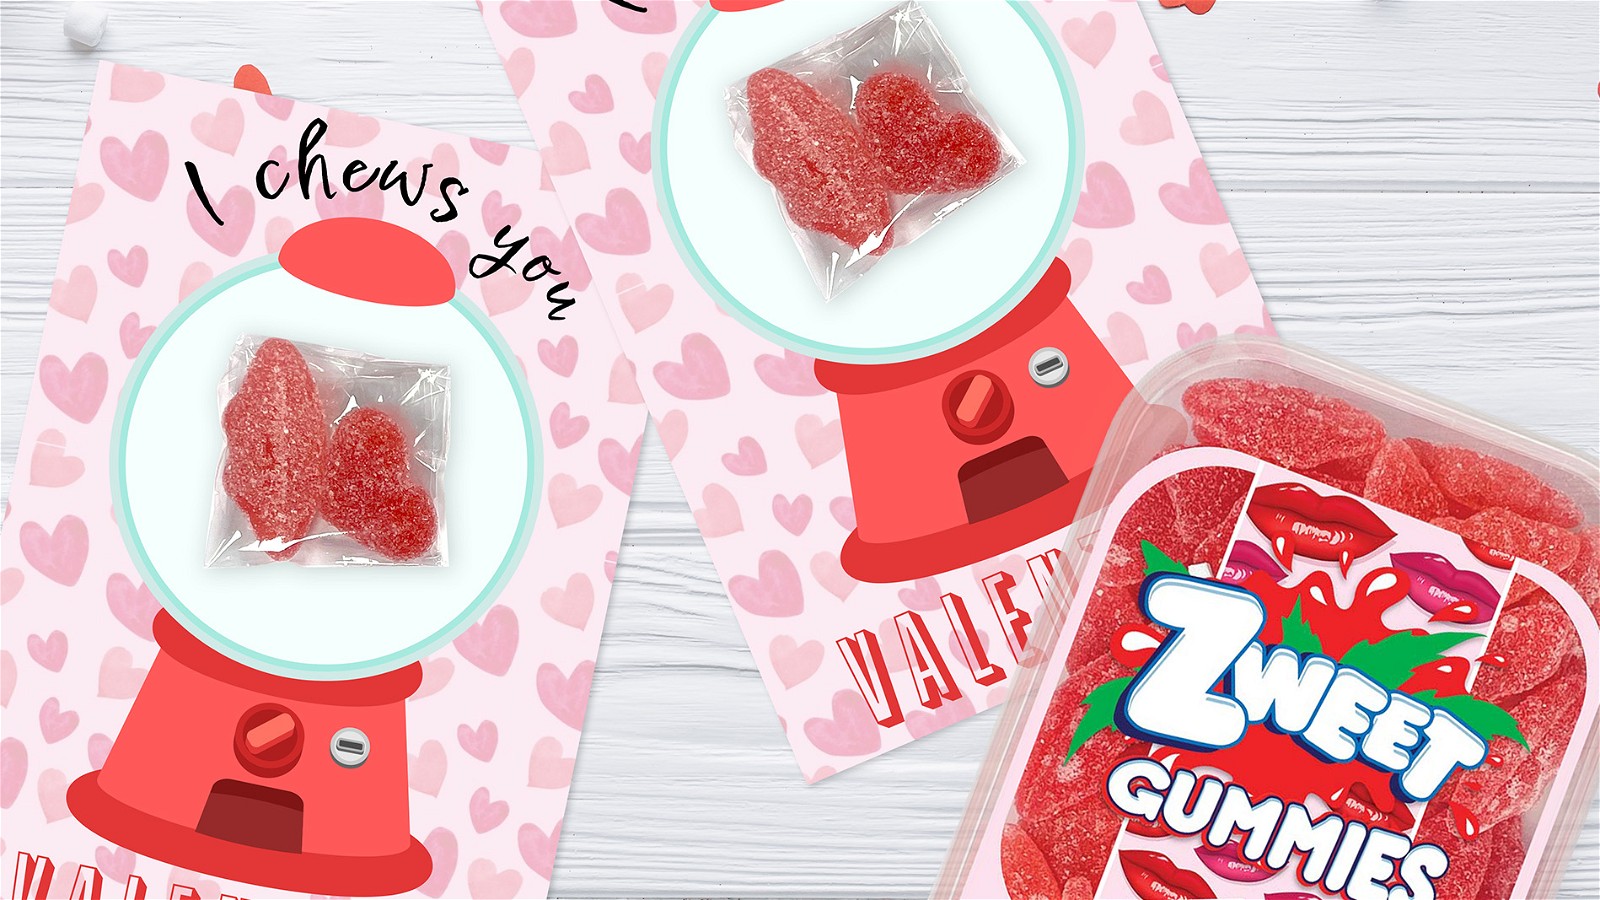 Image of DIY 'I Chews You' Valentine's Day Card